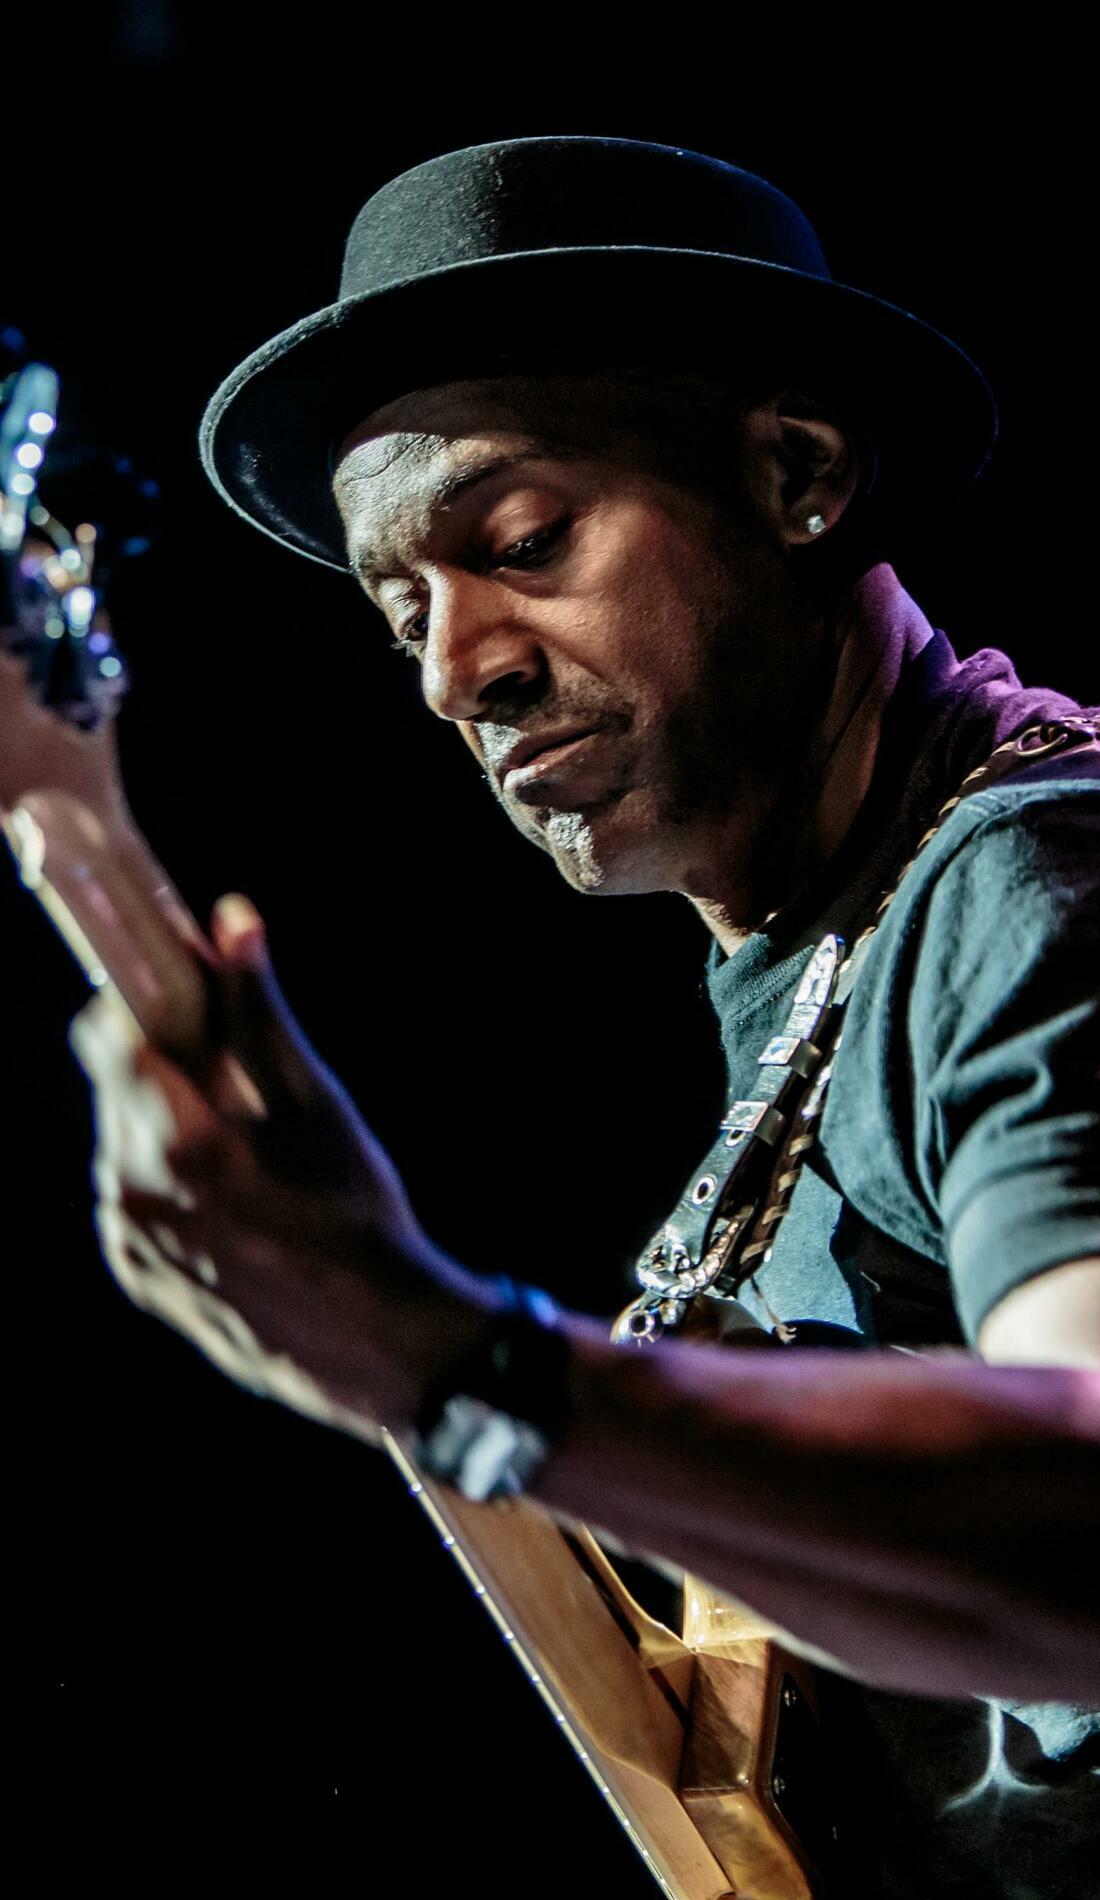 A Marcus Miller live event